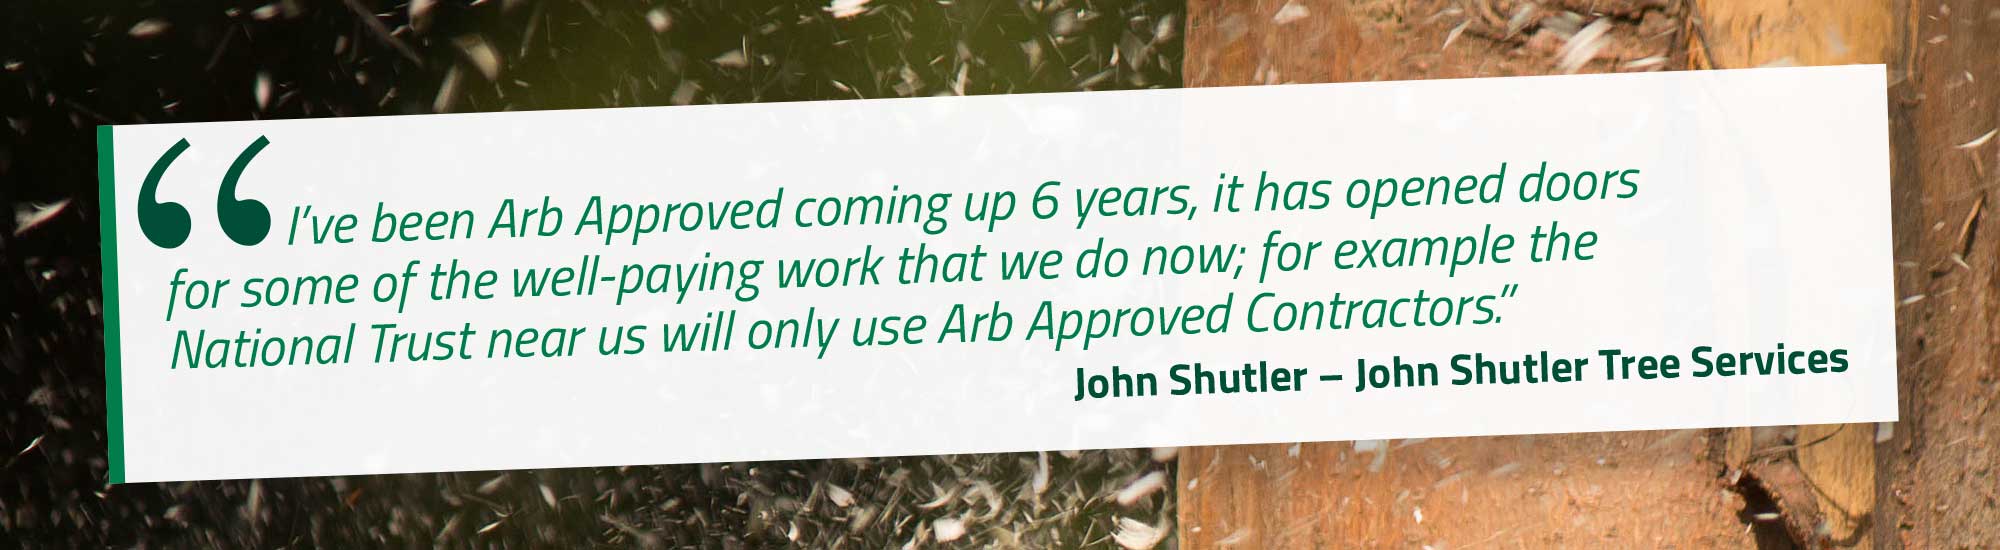 I’ve been Arb Approved coming up 6 years, it has opened doors for some of the well-paying work that we do now; for example the National Trust near us will only use Arb Approved Contractors. John Shutler – John Shutler Tree Services